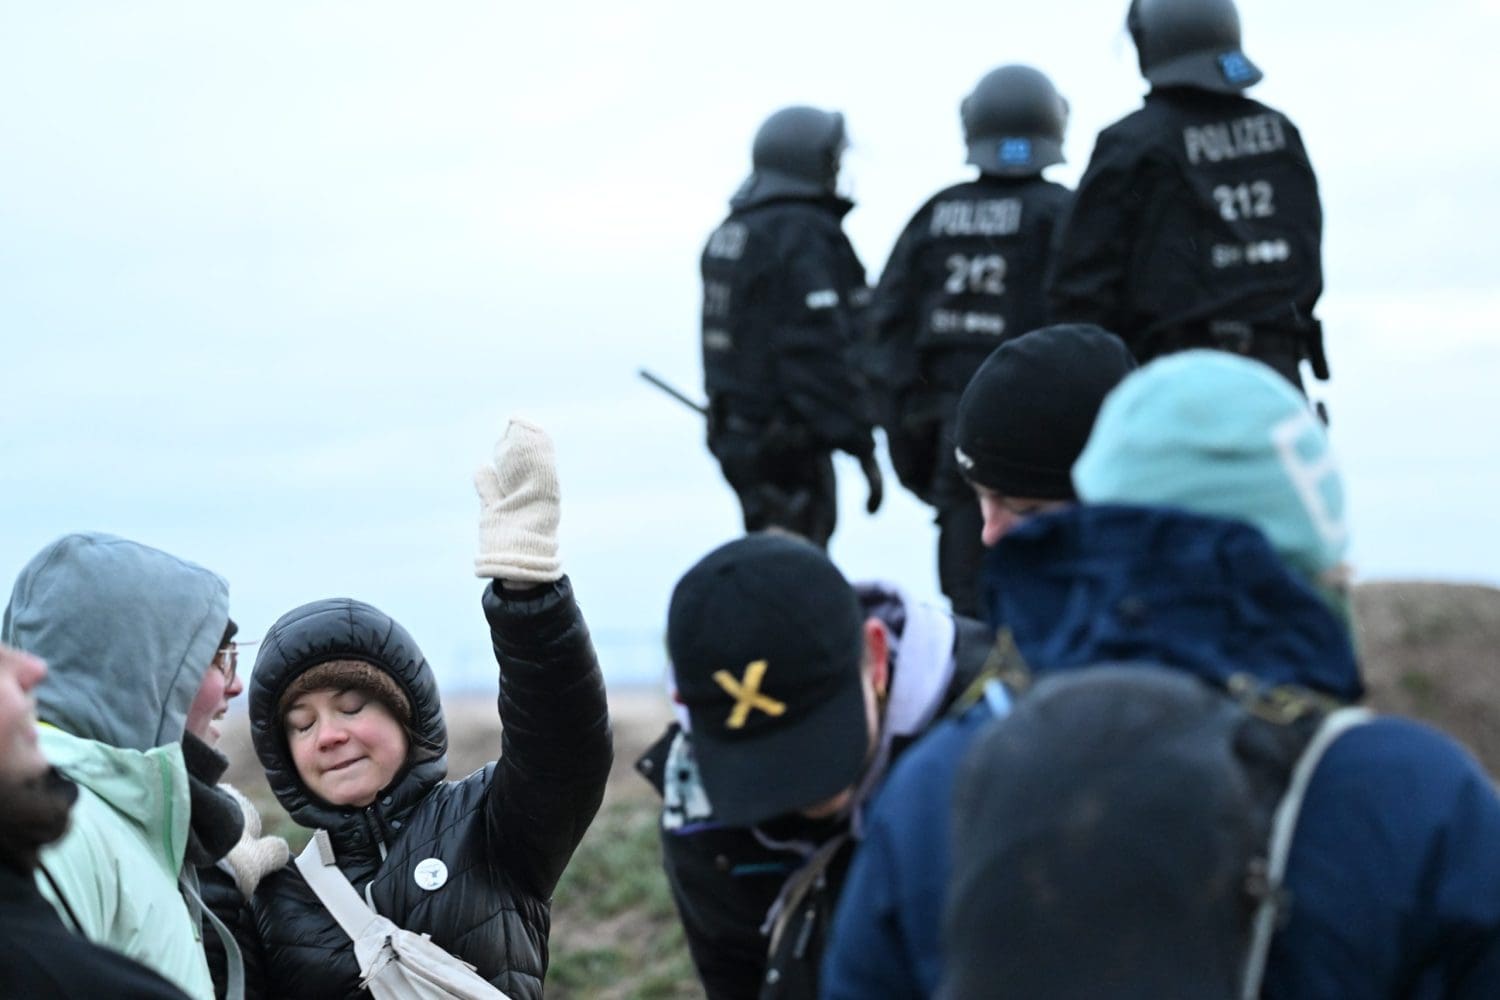 Greta Thunberg at a Lützerath with police in the background